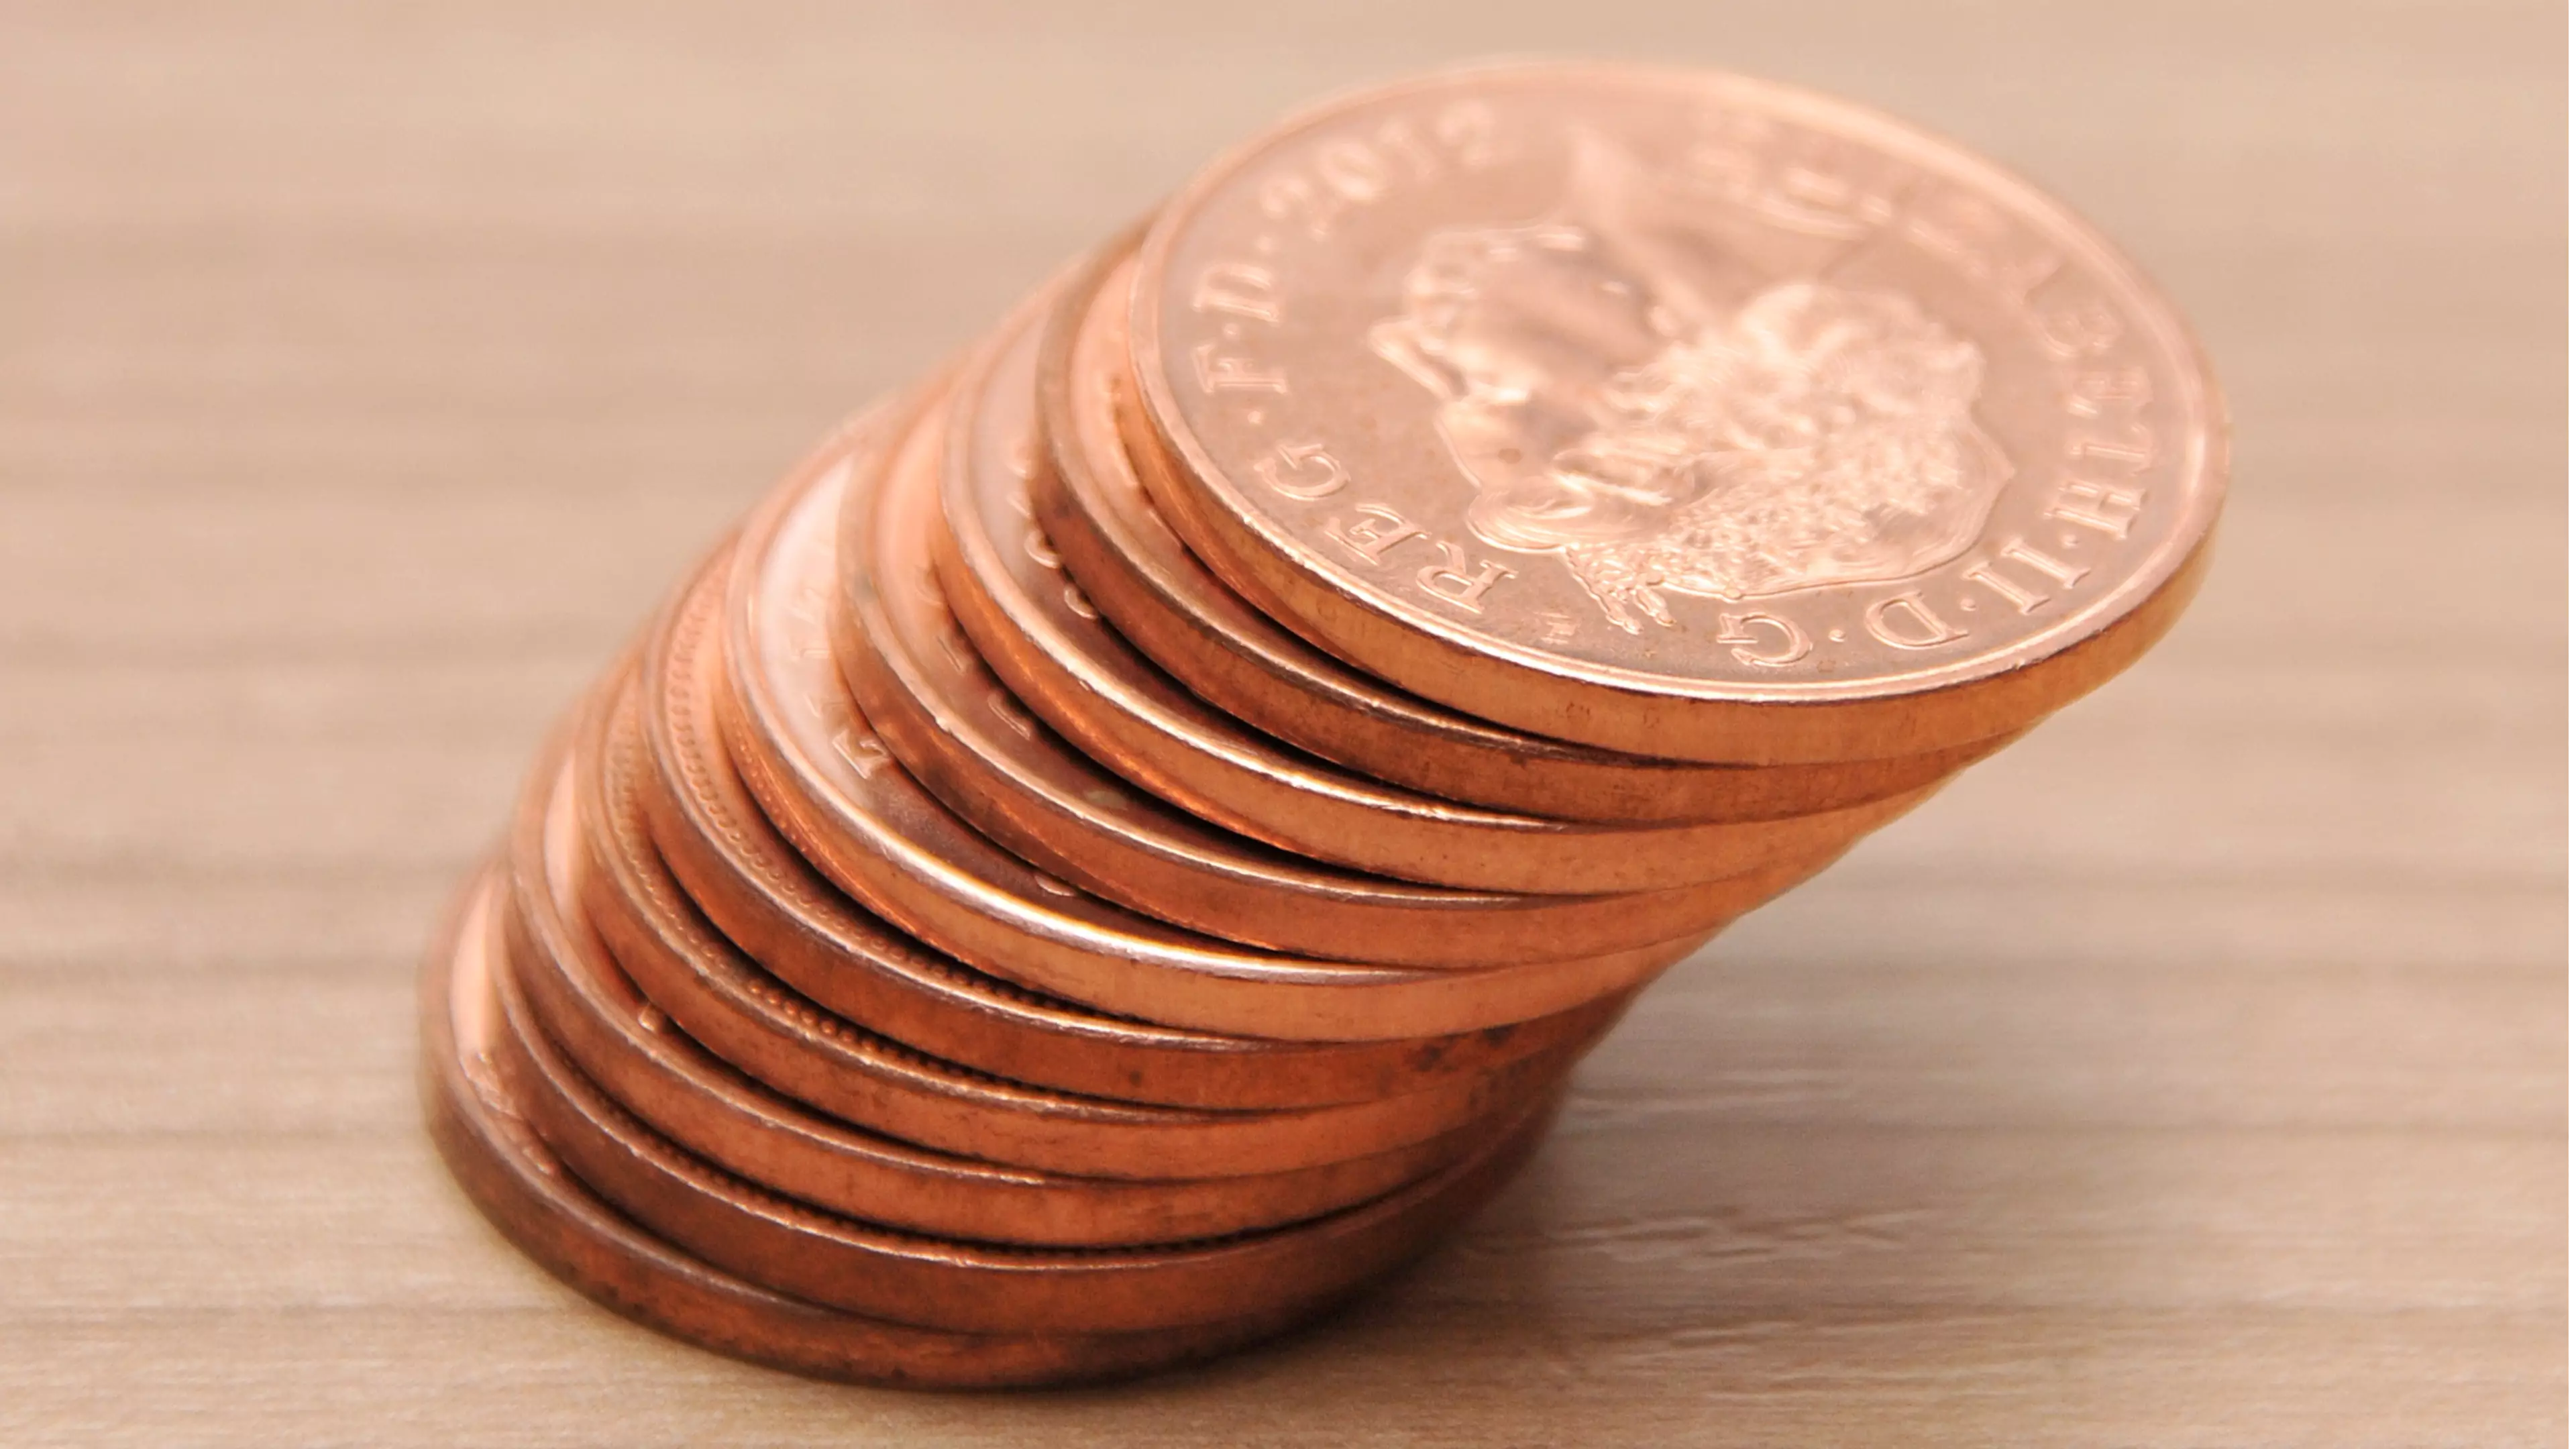 1p and 2p Coins 'Came Within Weeks Of Being Completely Scrapped'